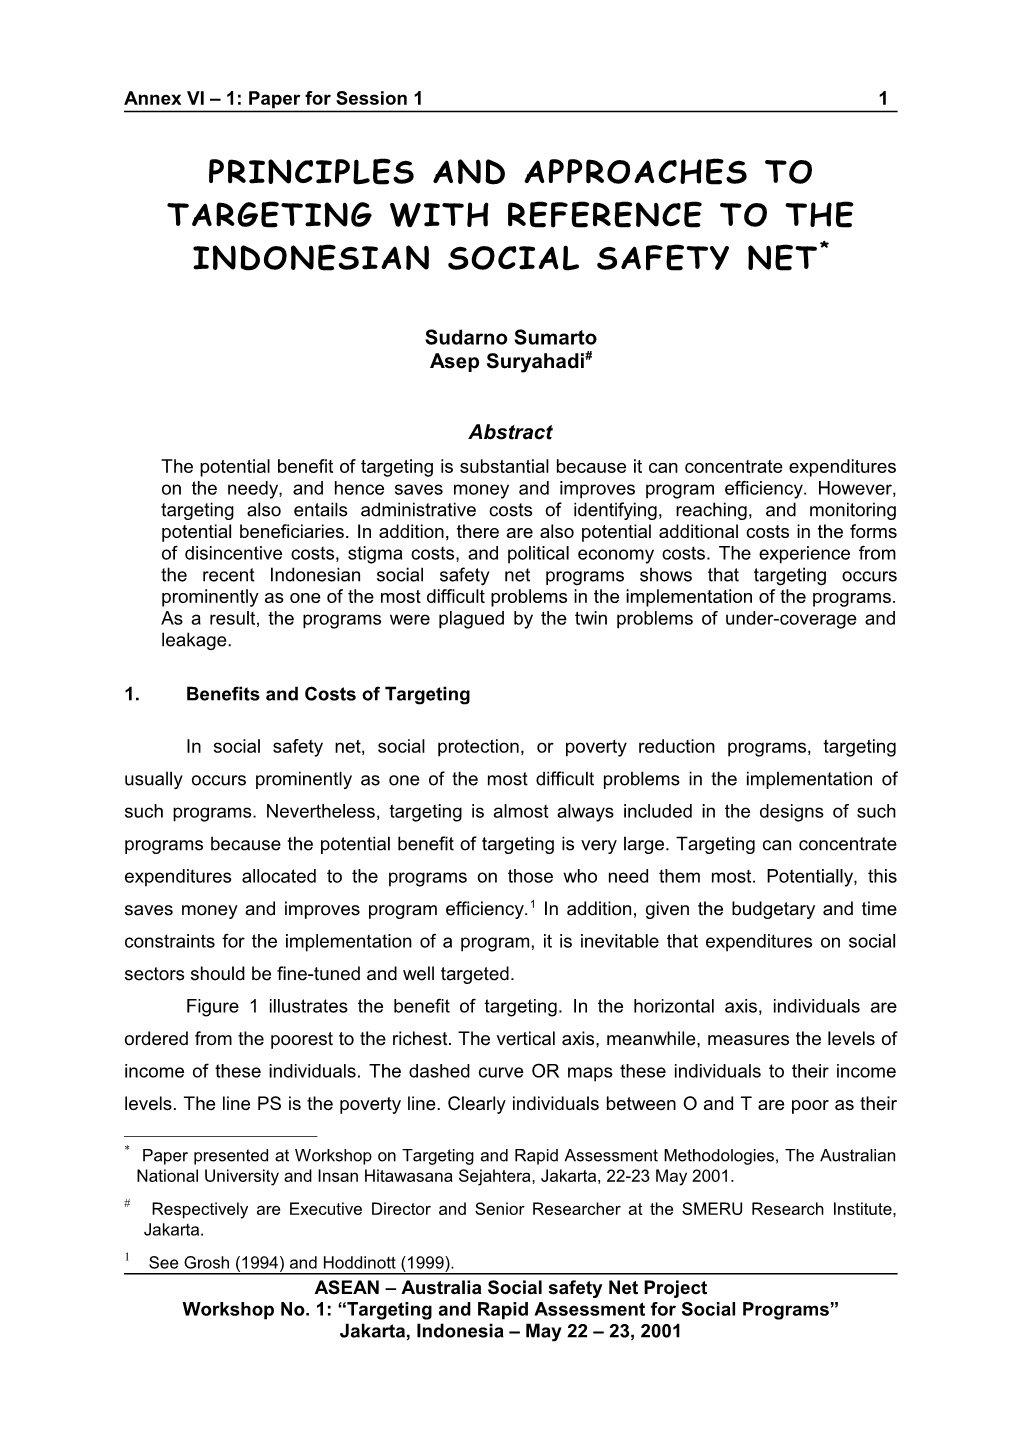 Evaluating the Indonesian Social Safety Net Program: Evidence from the December Round Of